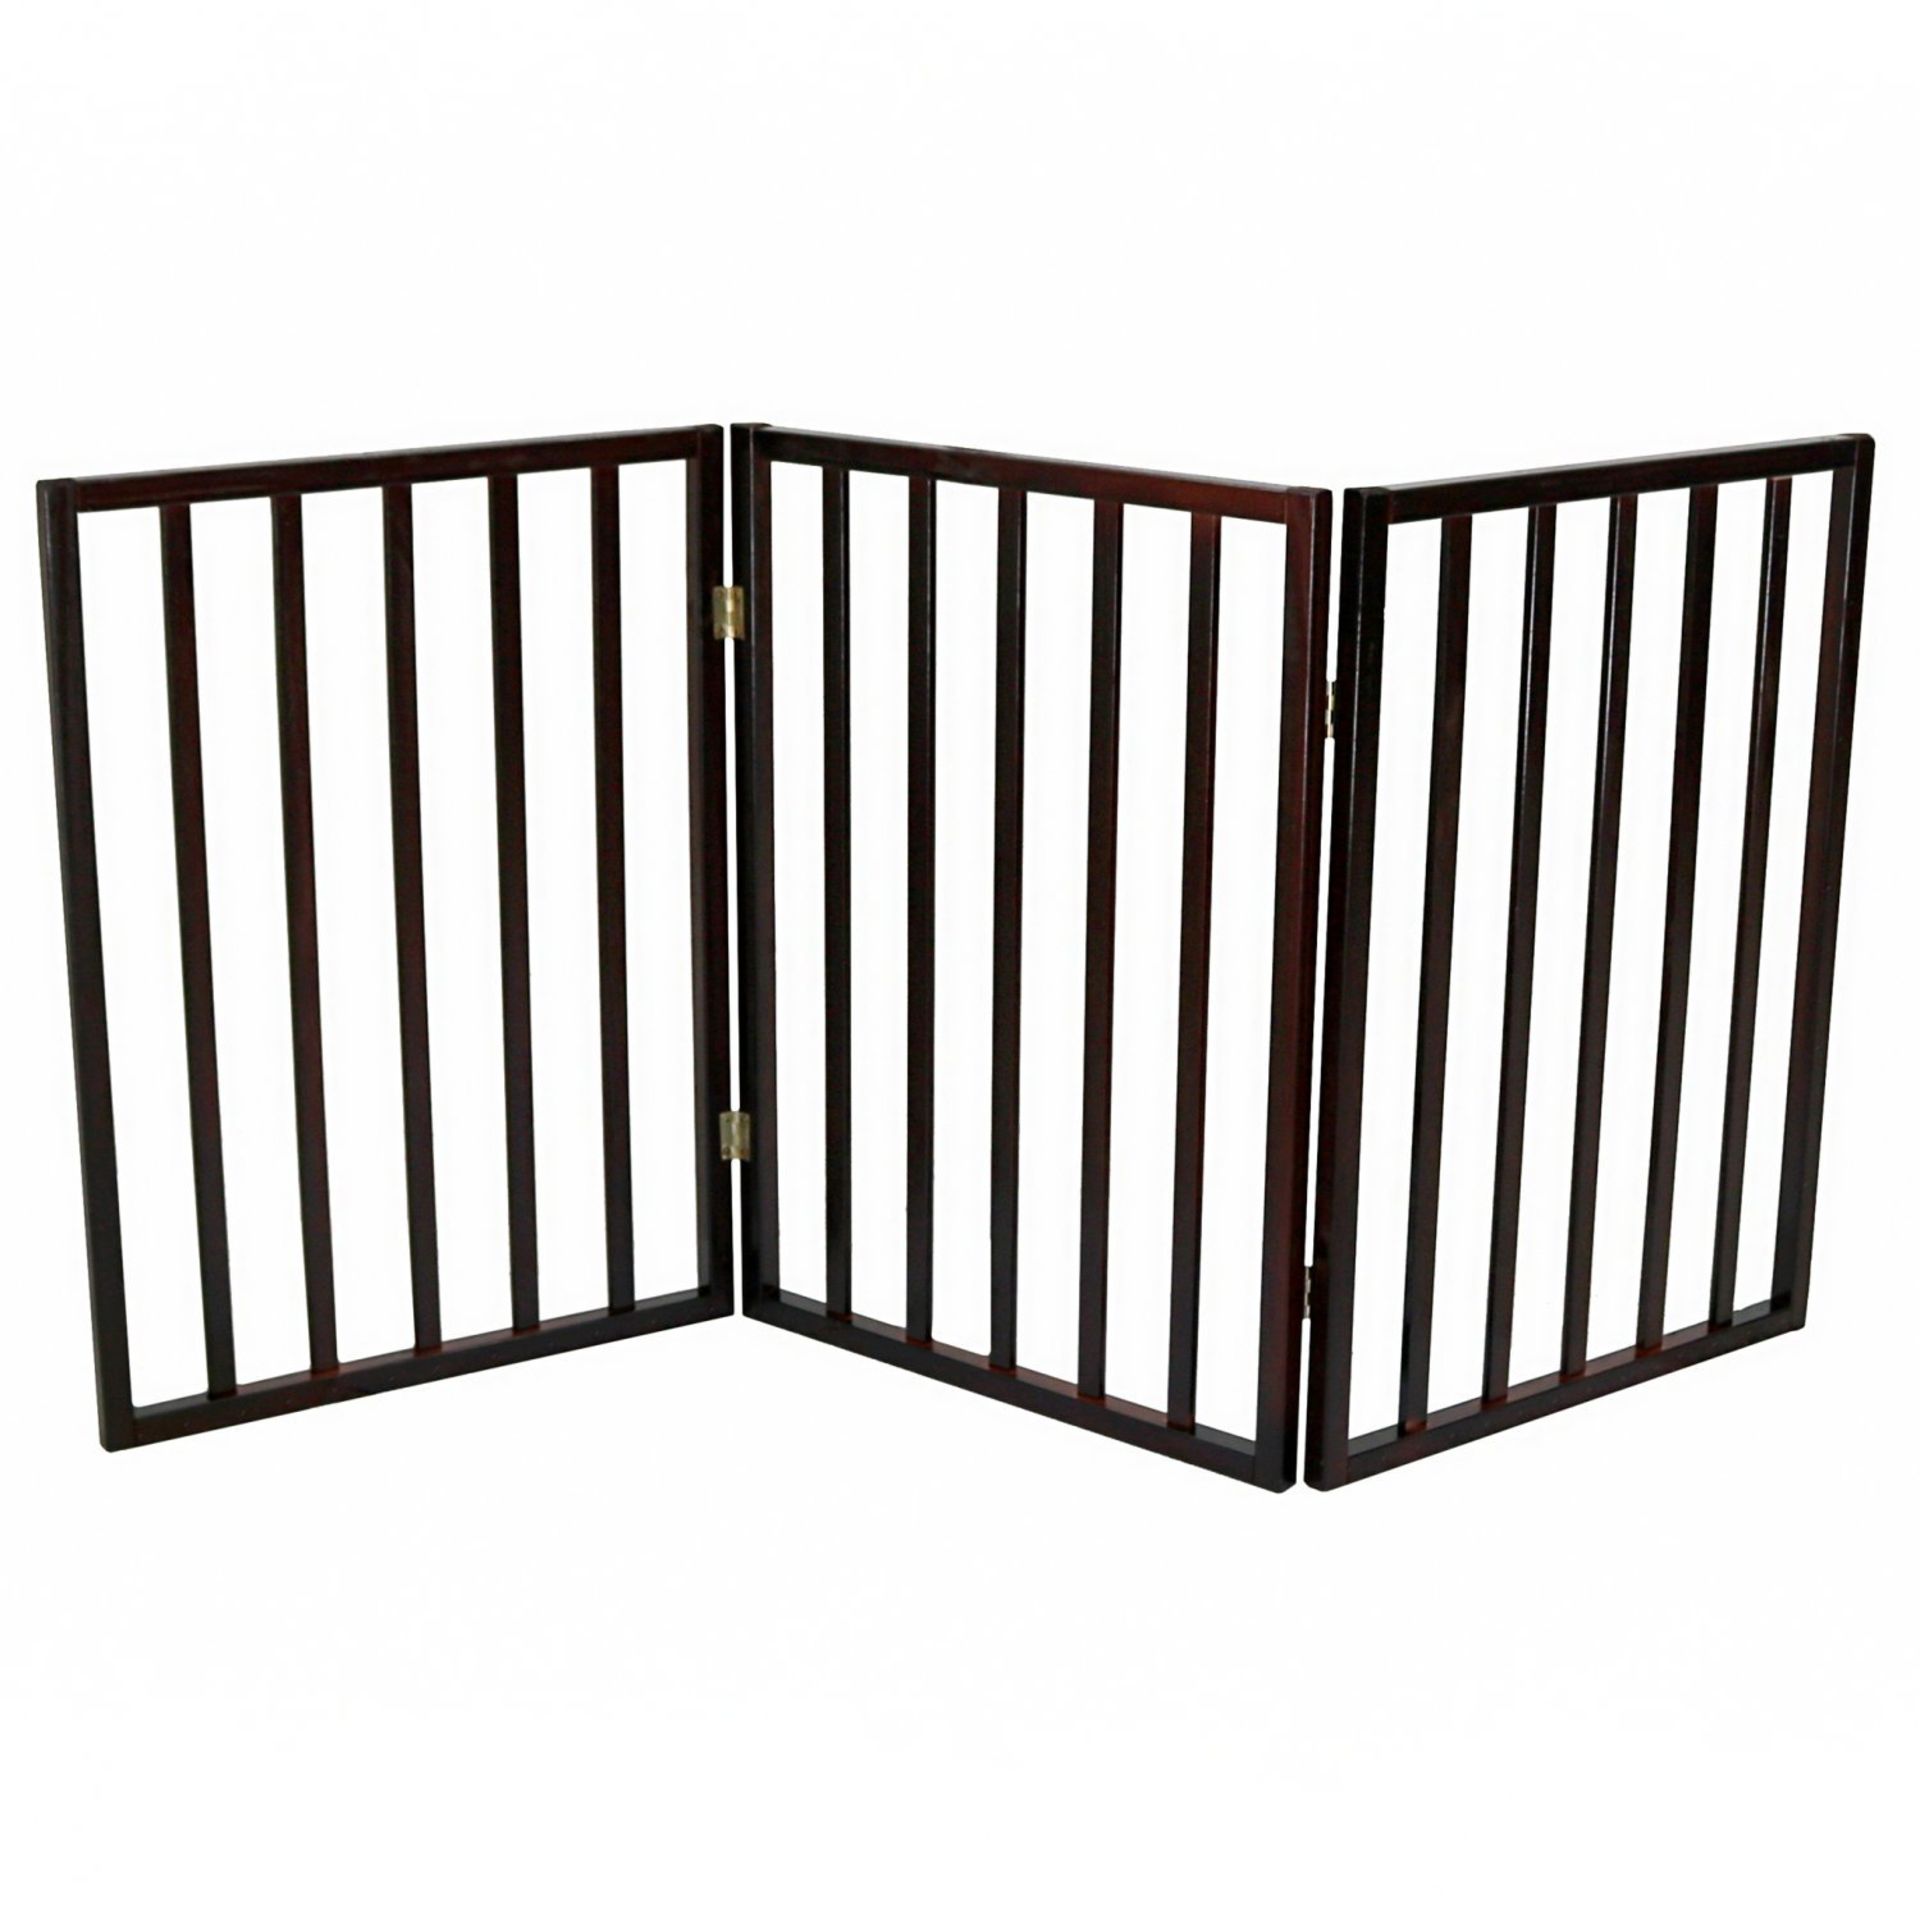 (L57) Dog Safety Folding Wooden Pet Gate Portable Indoor Barrier 3 Hinged Sections - Panel Dim...